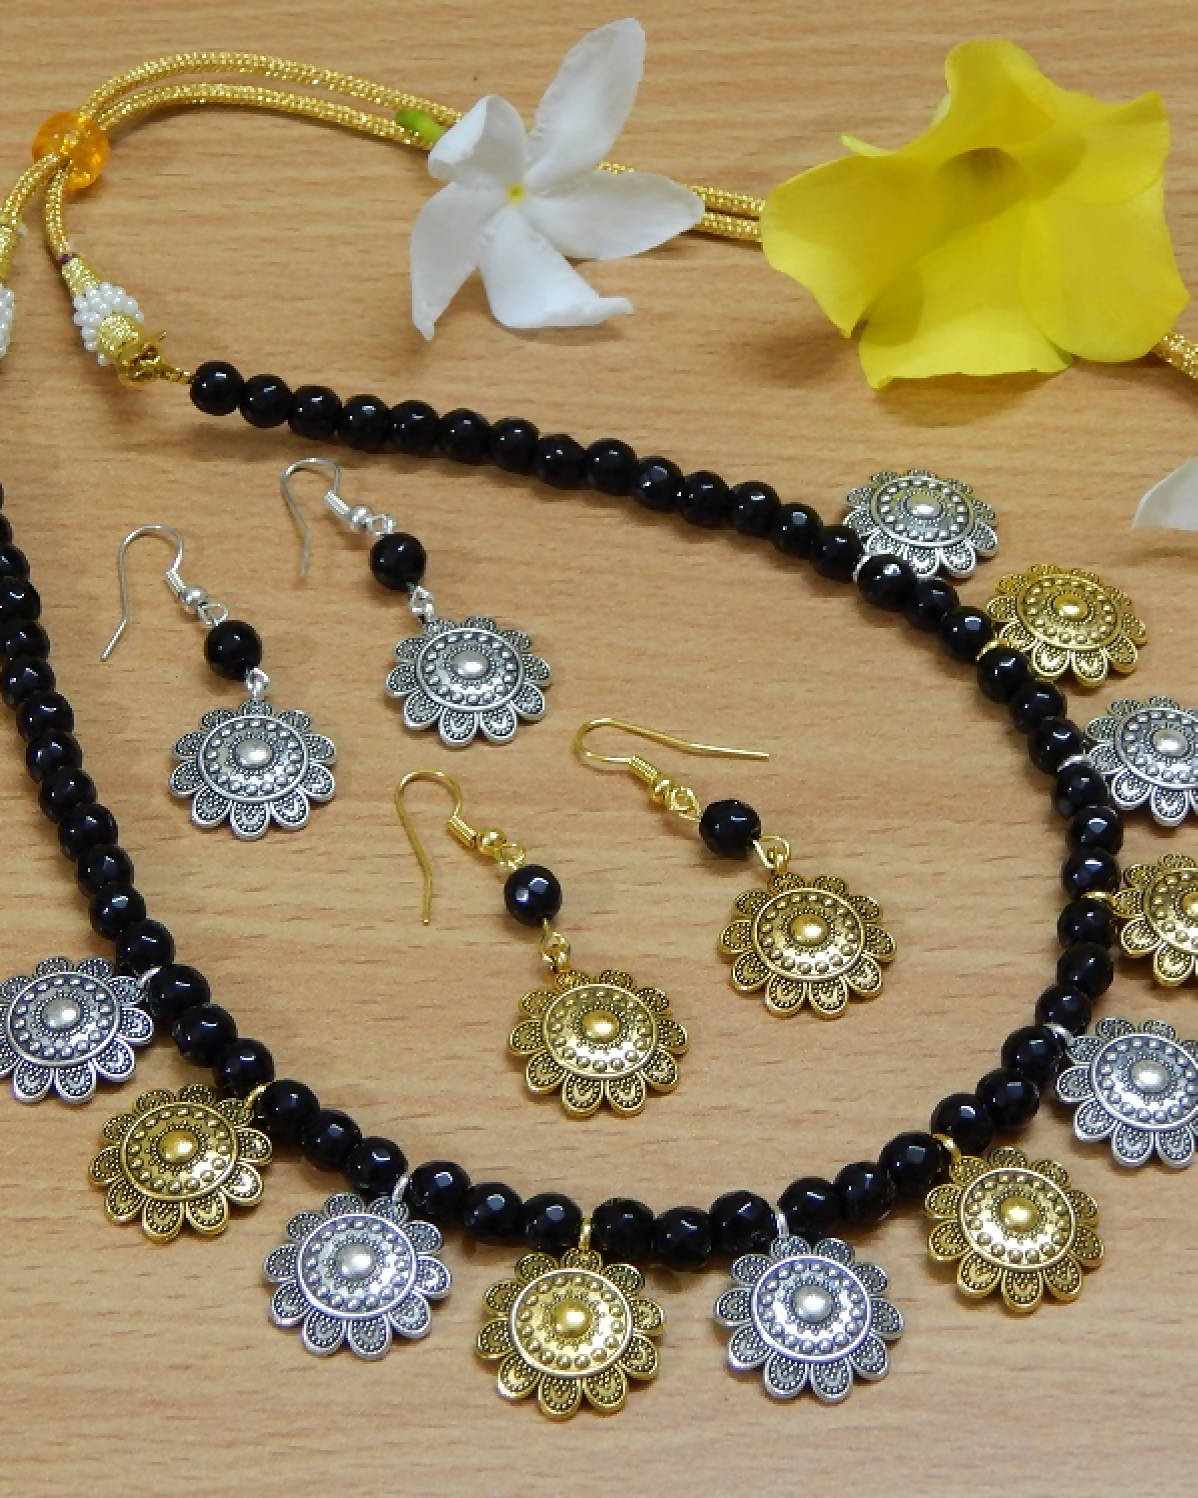 Oxidized Dual Colour Flower Charms Black Agate Beads Necklace Set with Double Pair Earrings